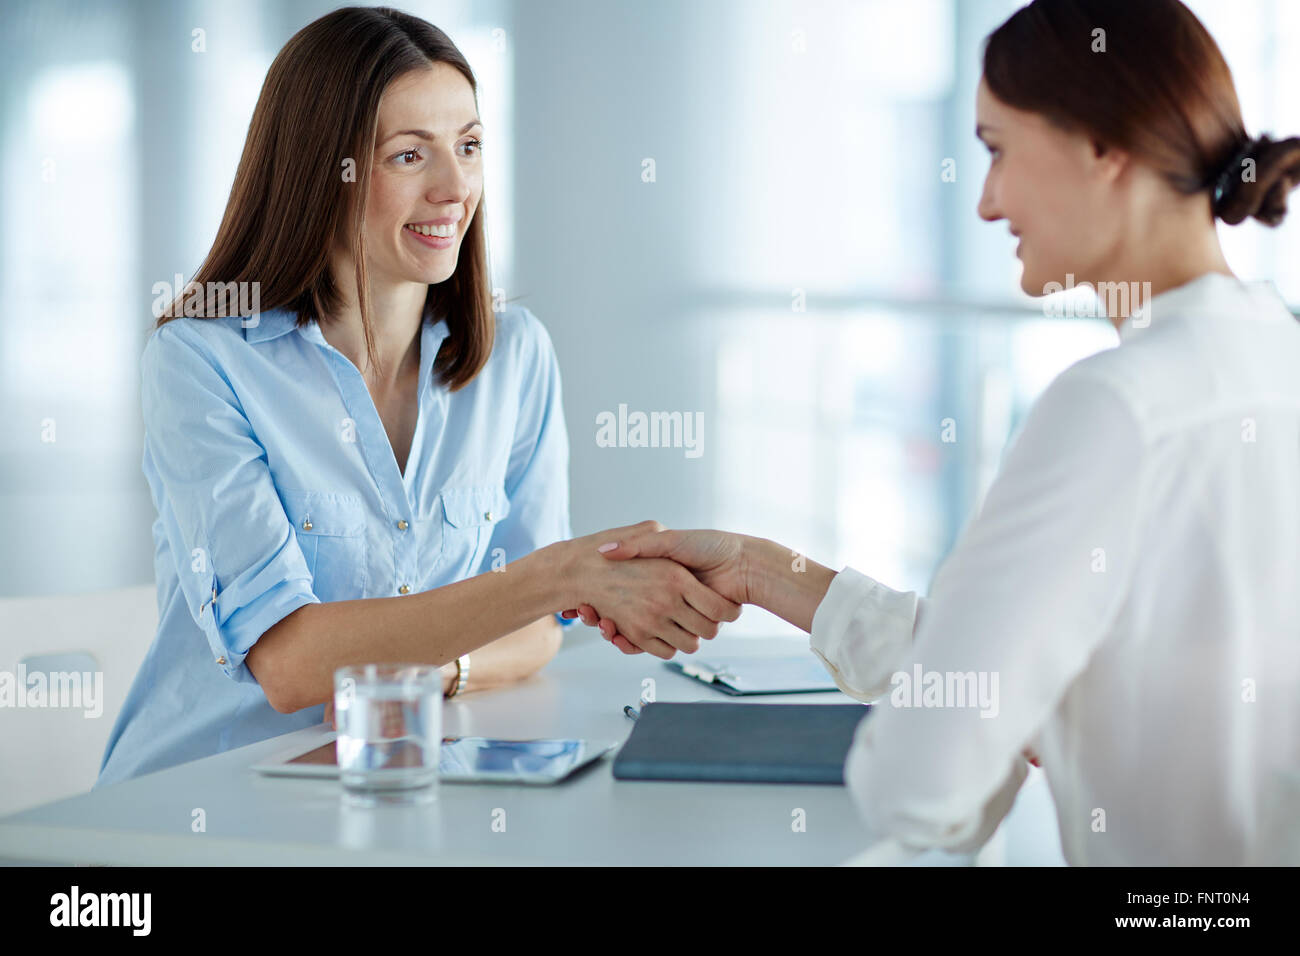 Personal manager greeting a woman at job interview Stock Photo